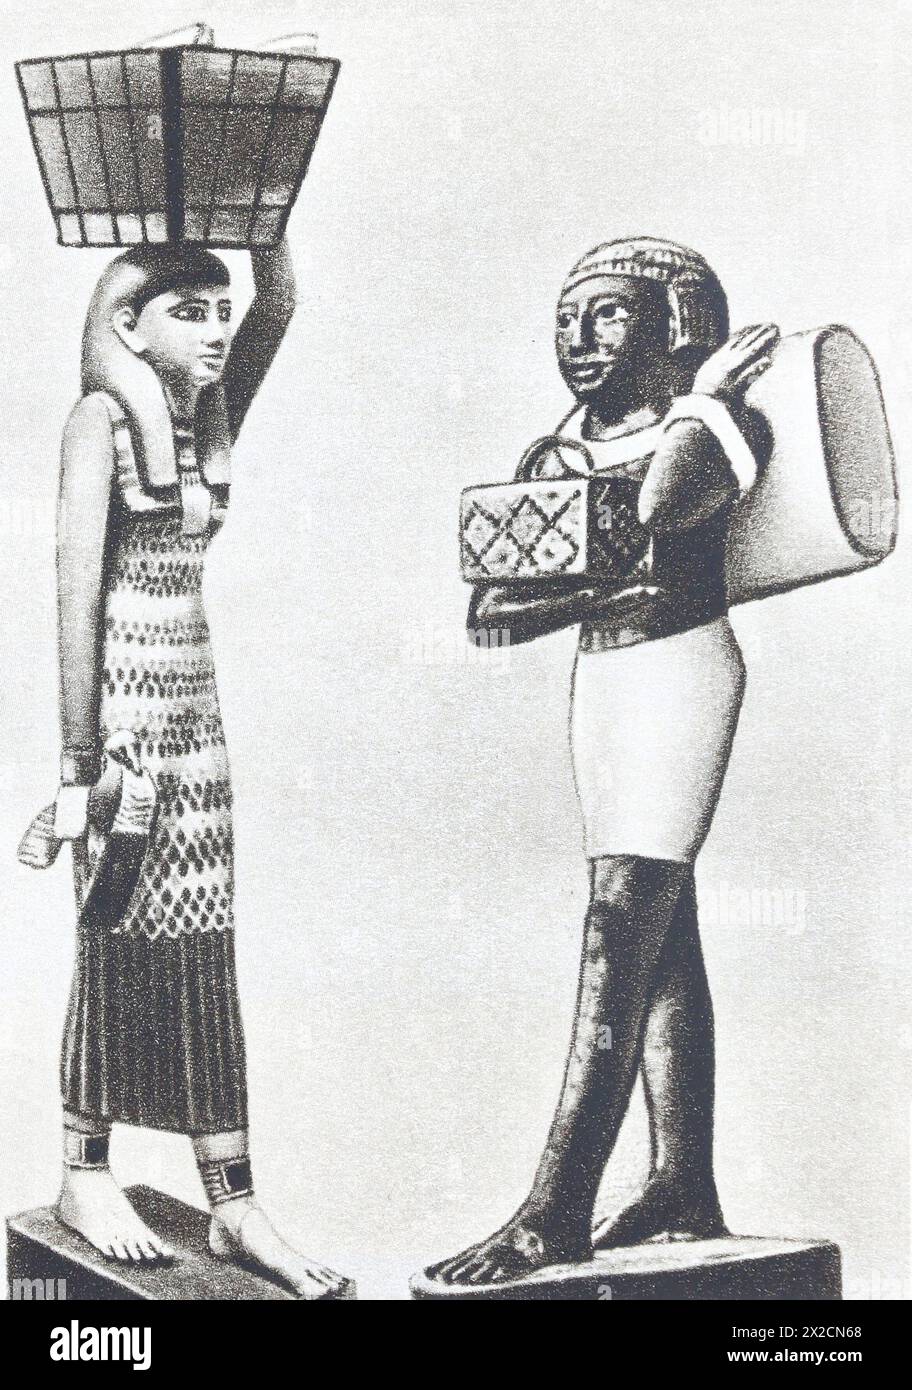 Ancient Egyptian wooden figurines depicting servants from a rich house of the 3rd millennium BC. Photo from the mid-20th century. Stock Photo